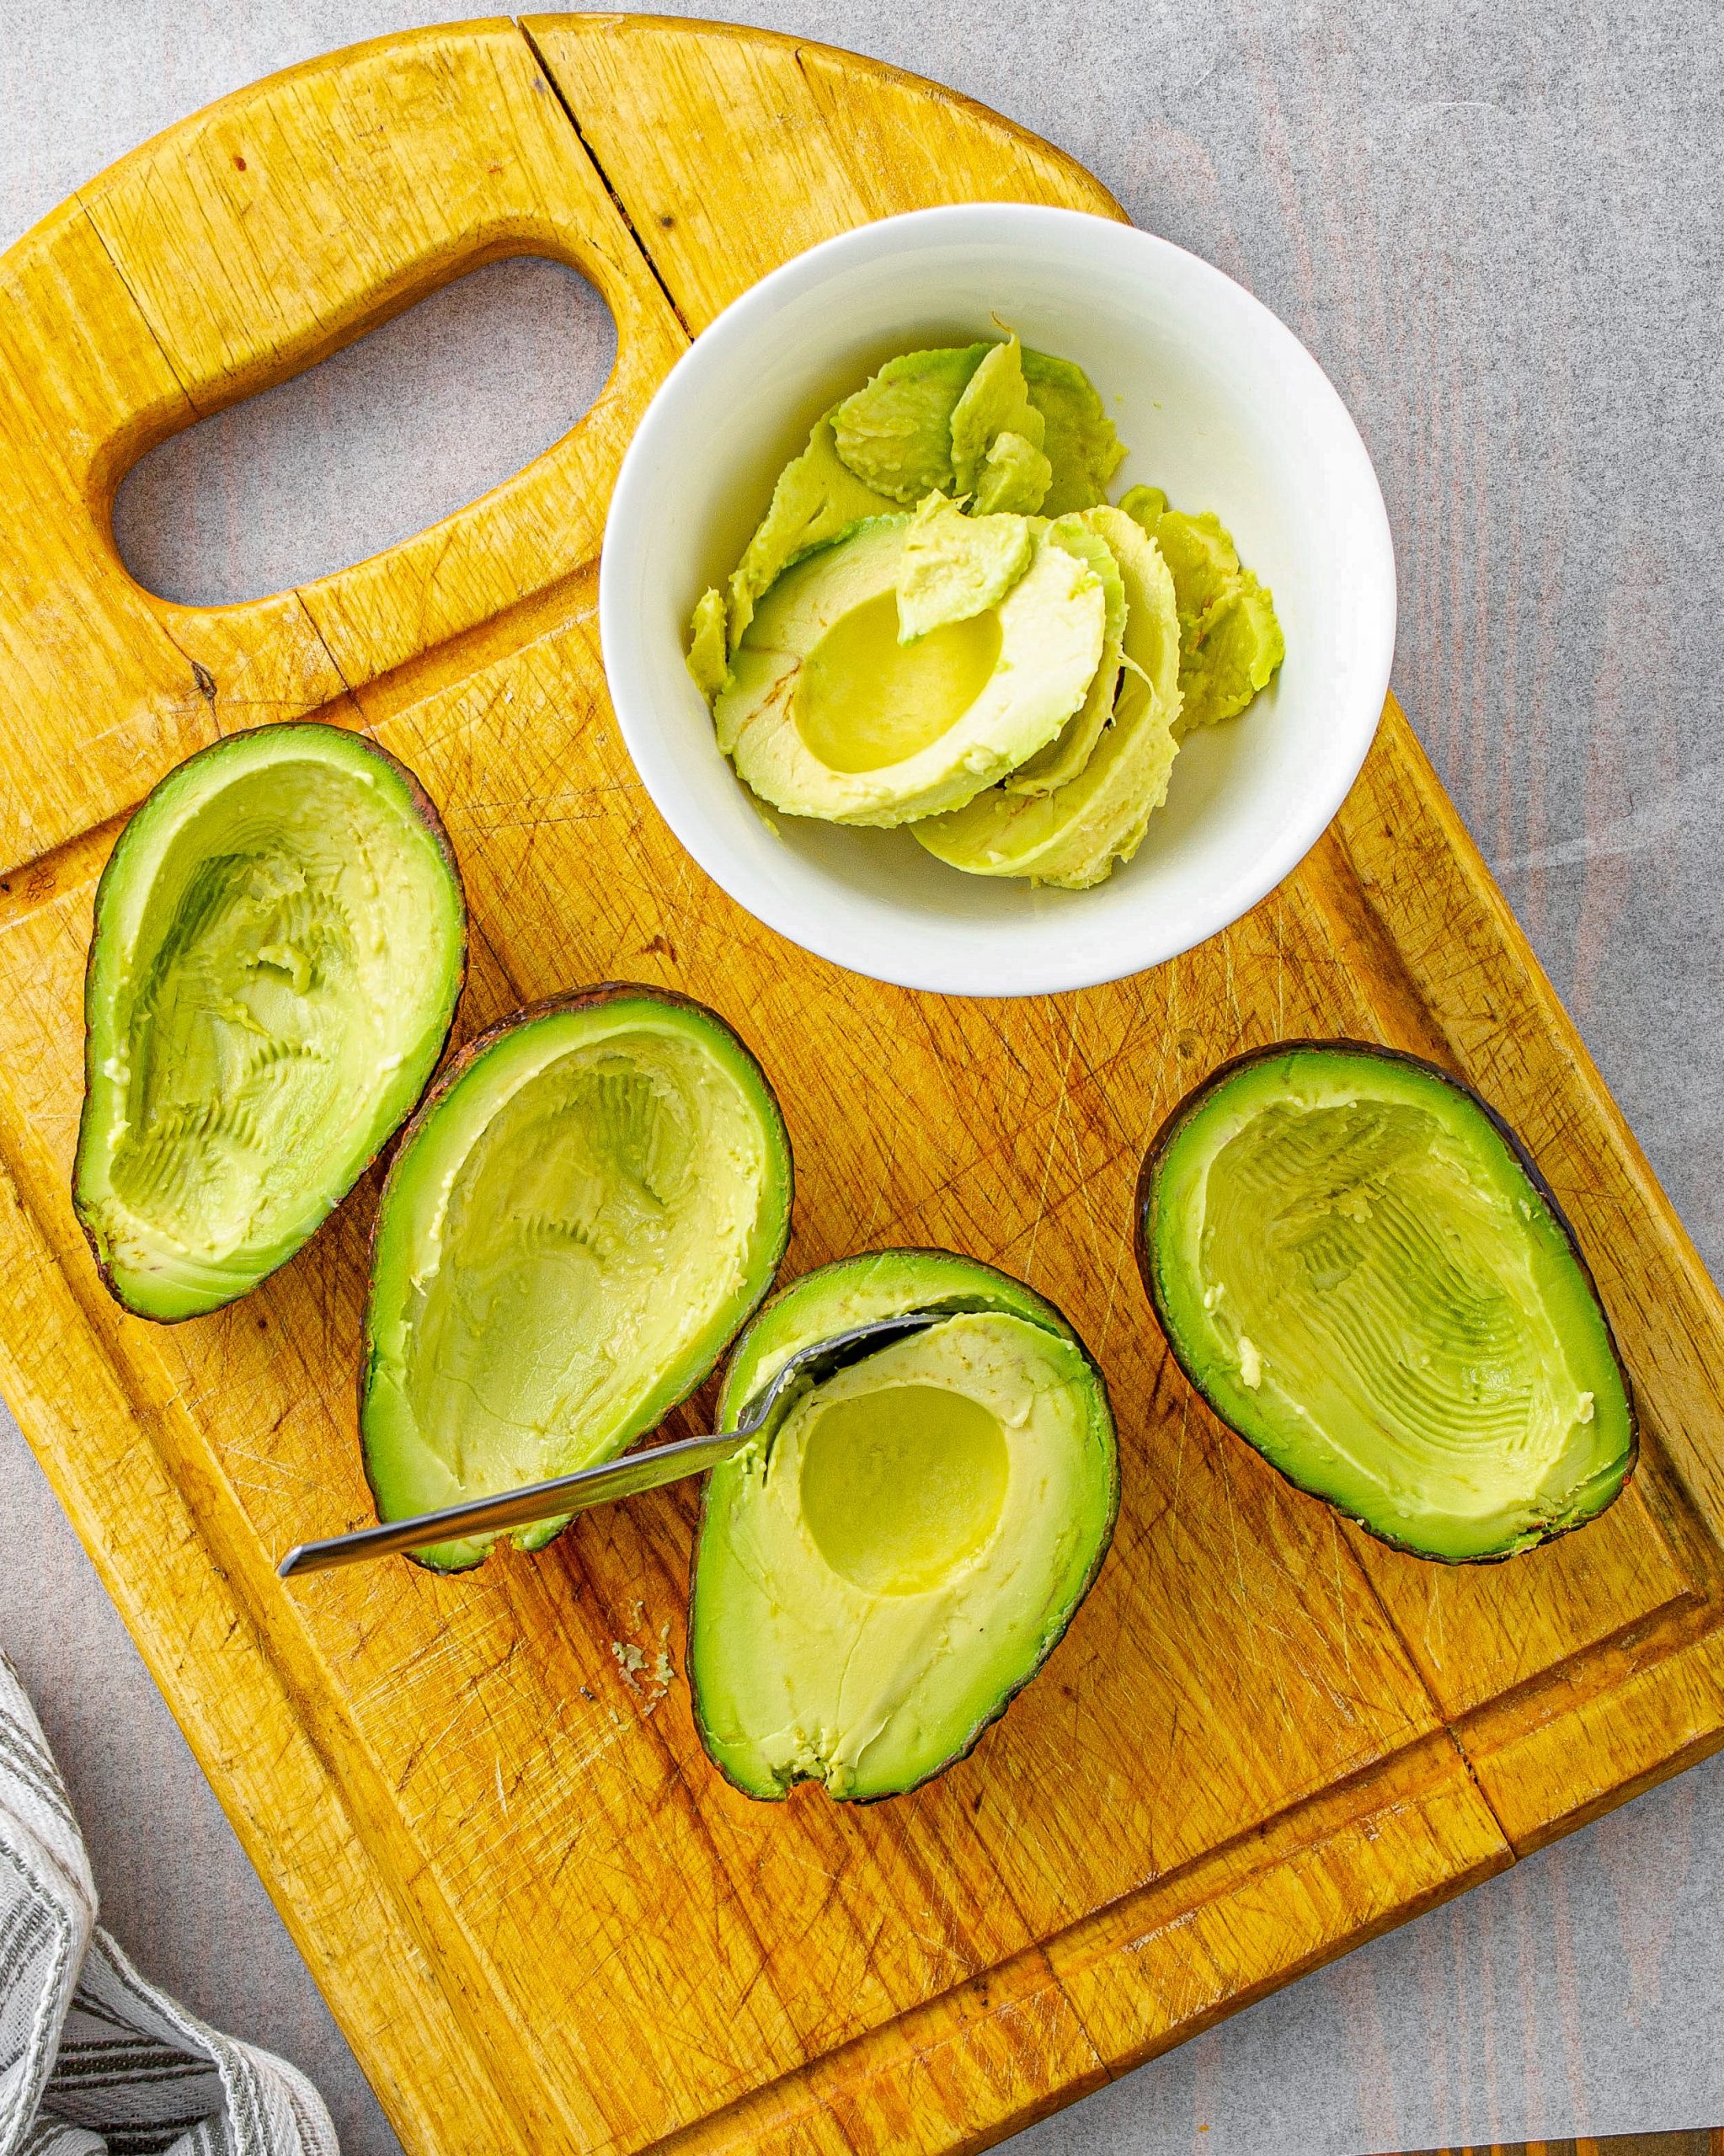 Scoop out the flesh from the inside of the avocados.